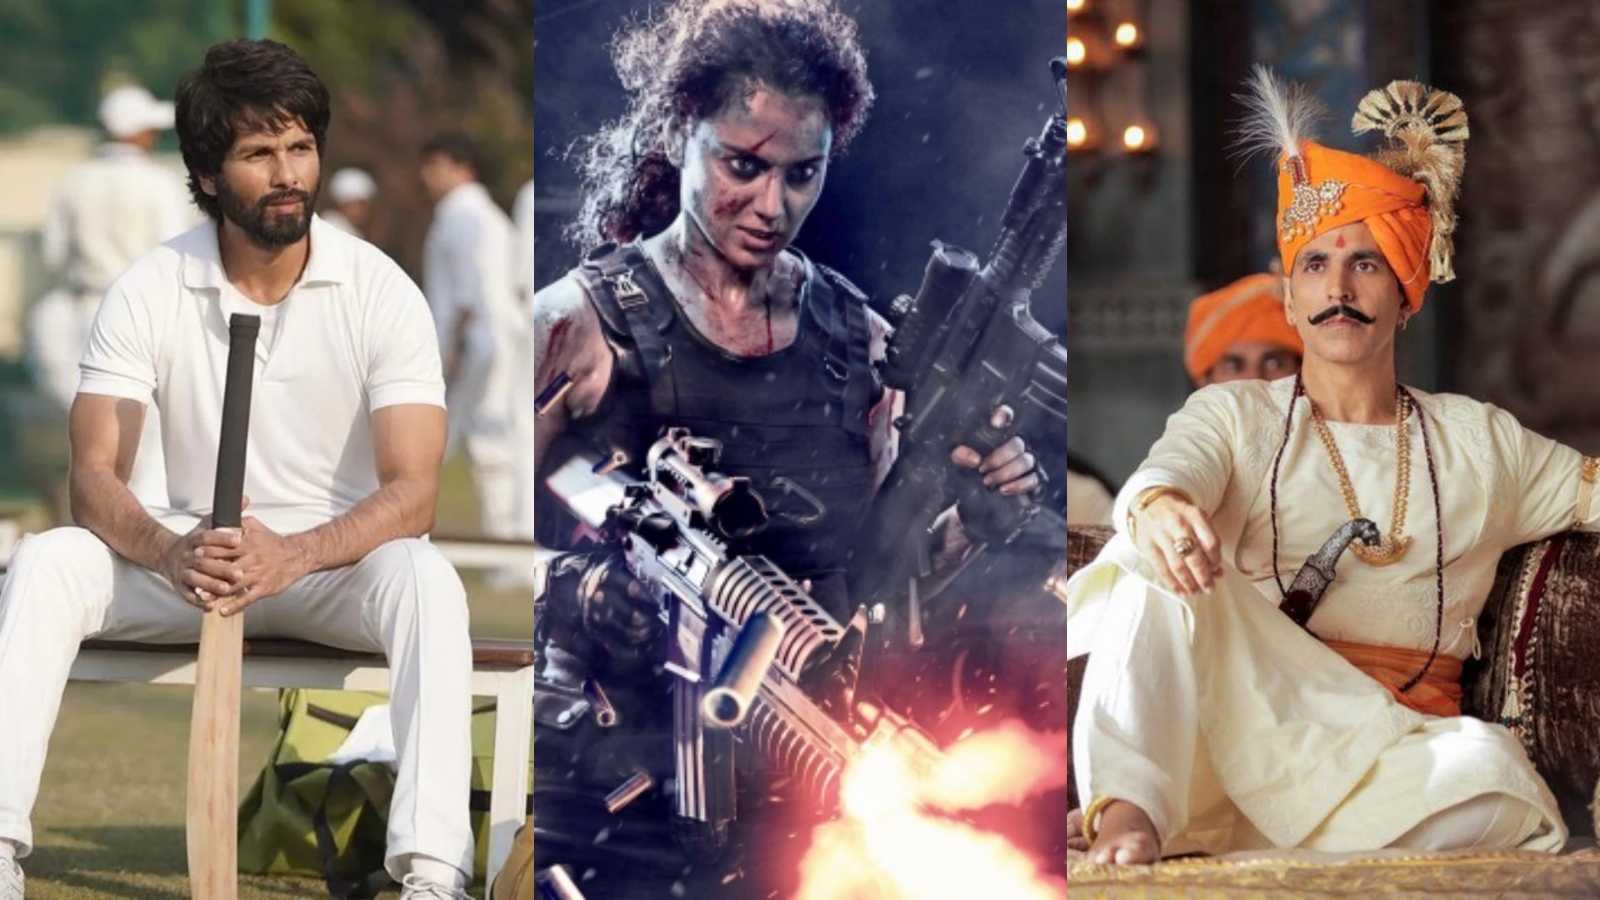 Since Bollywood is competing on biggest flops this year, meet the stars who have topped the list in the first half of 2022